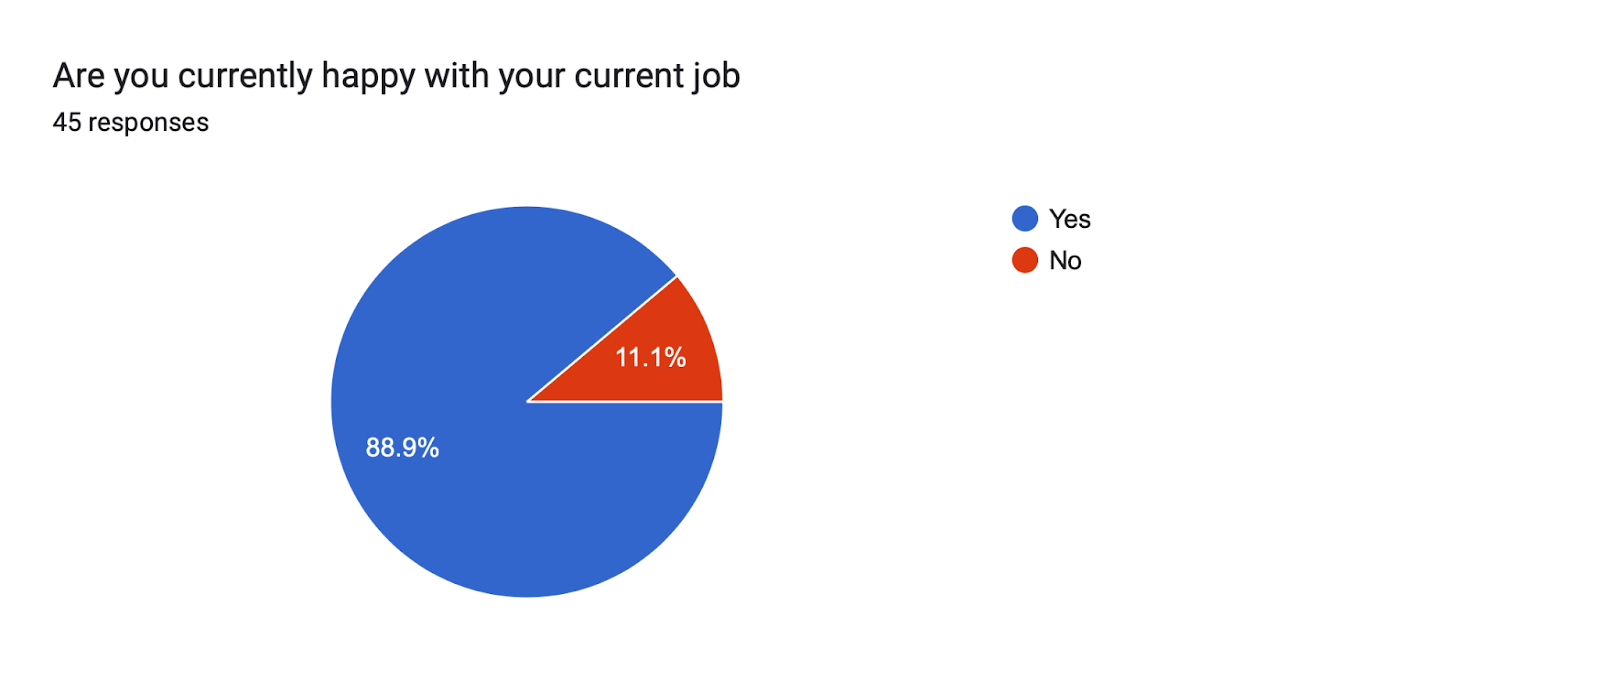 Forms response chart. Question title: Are you currently happy with your current job. Number of responses: 45 responses.